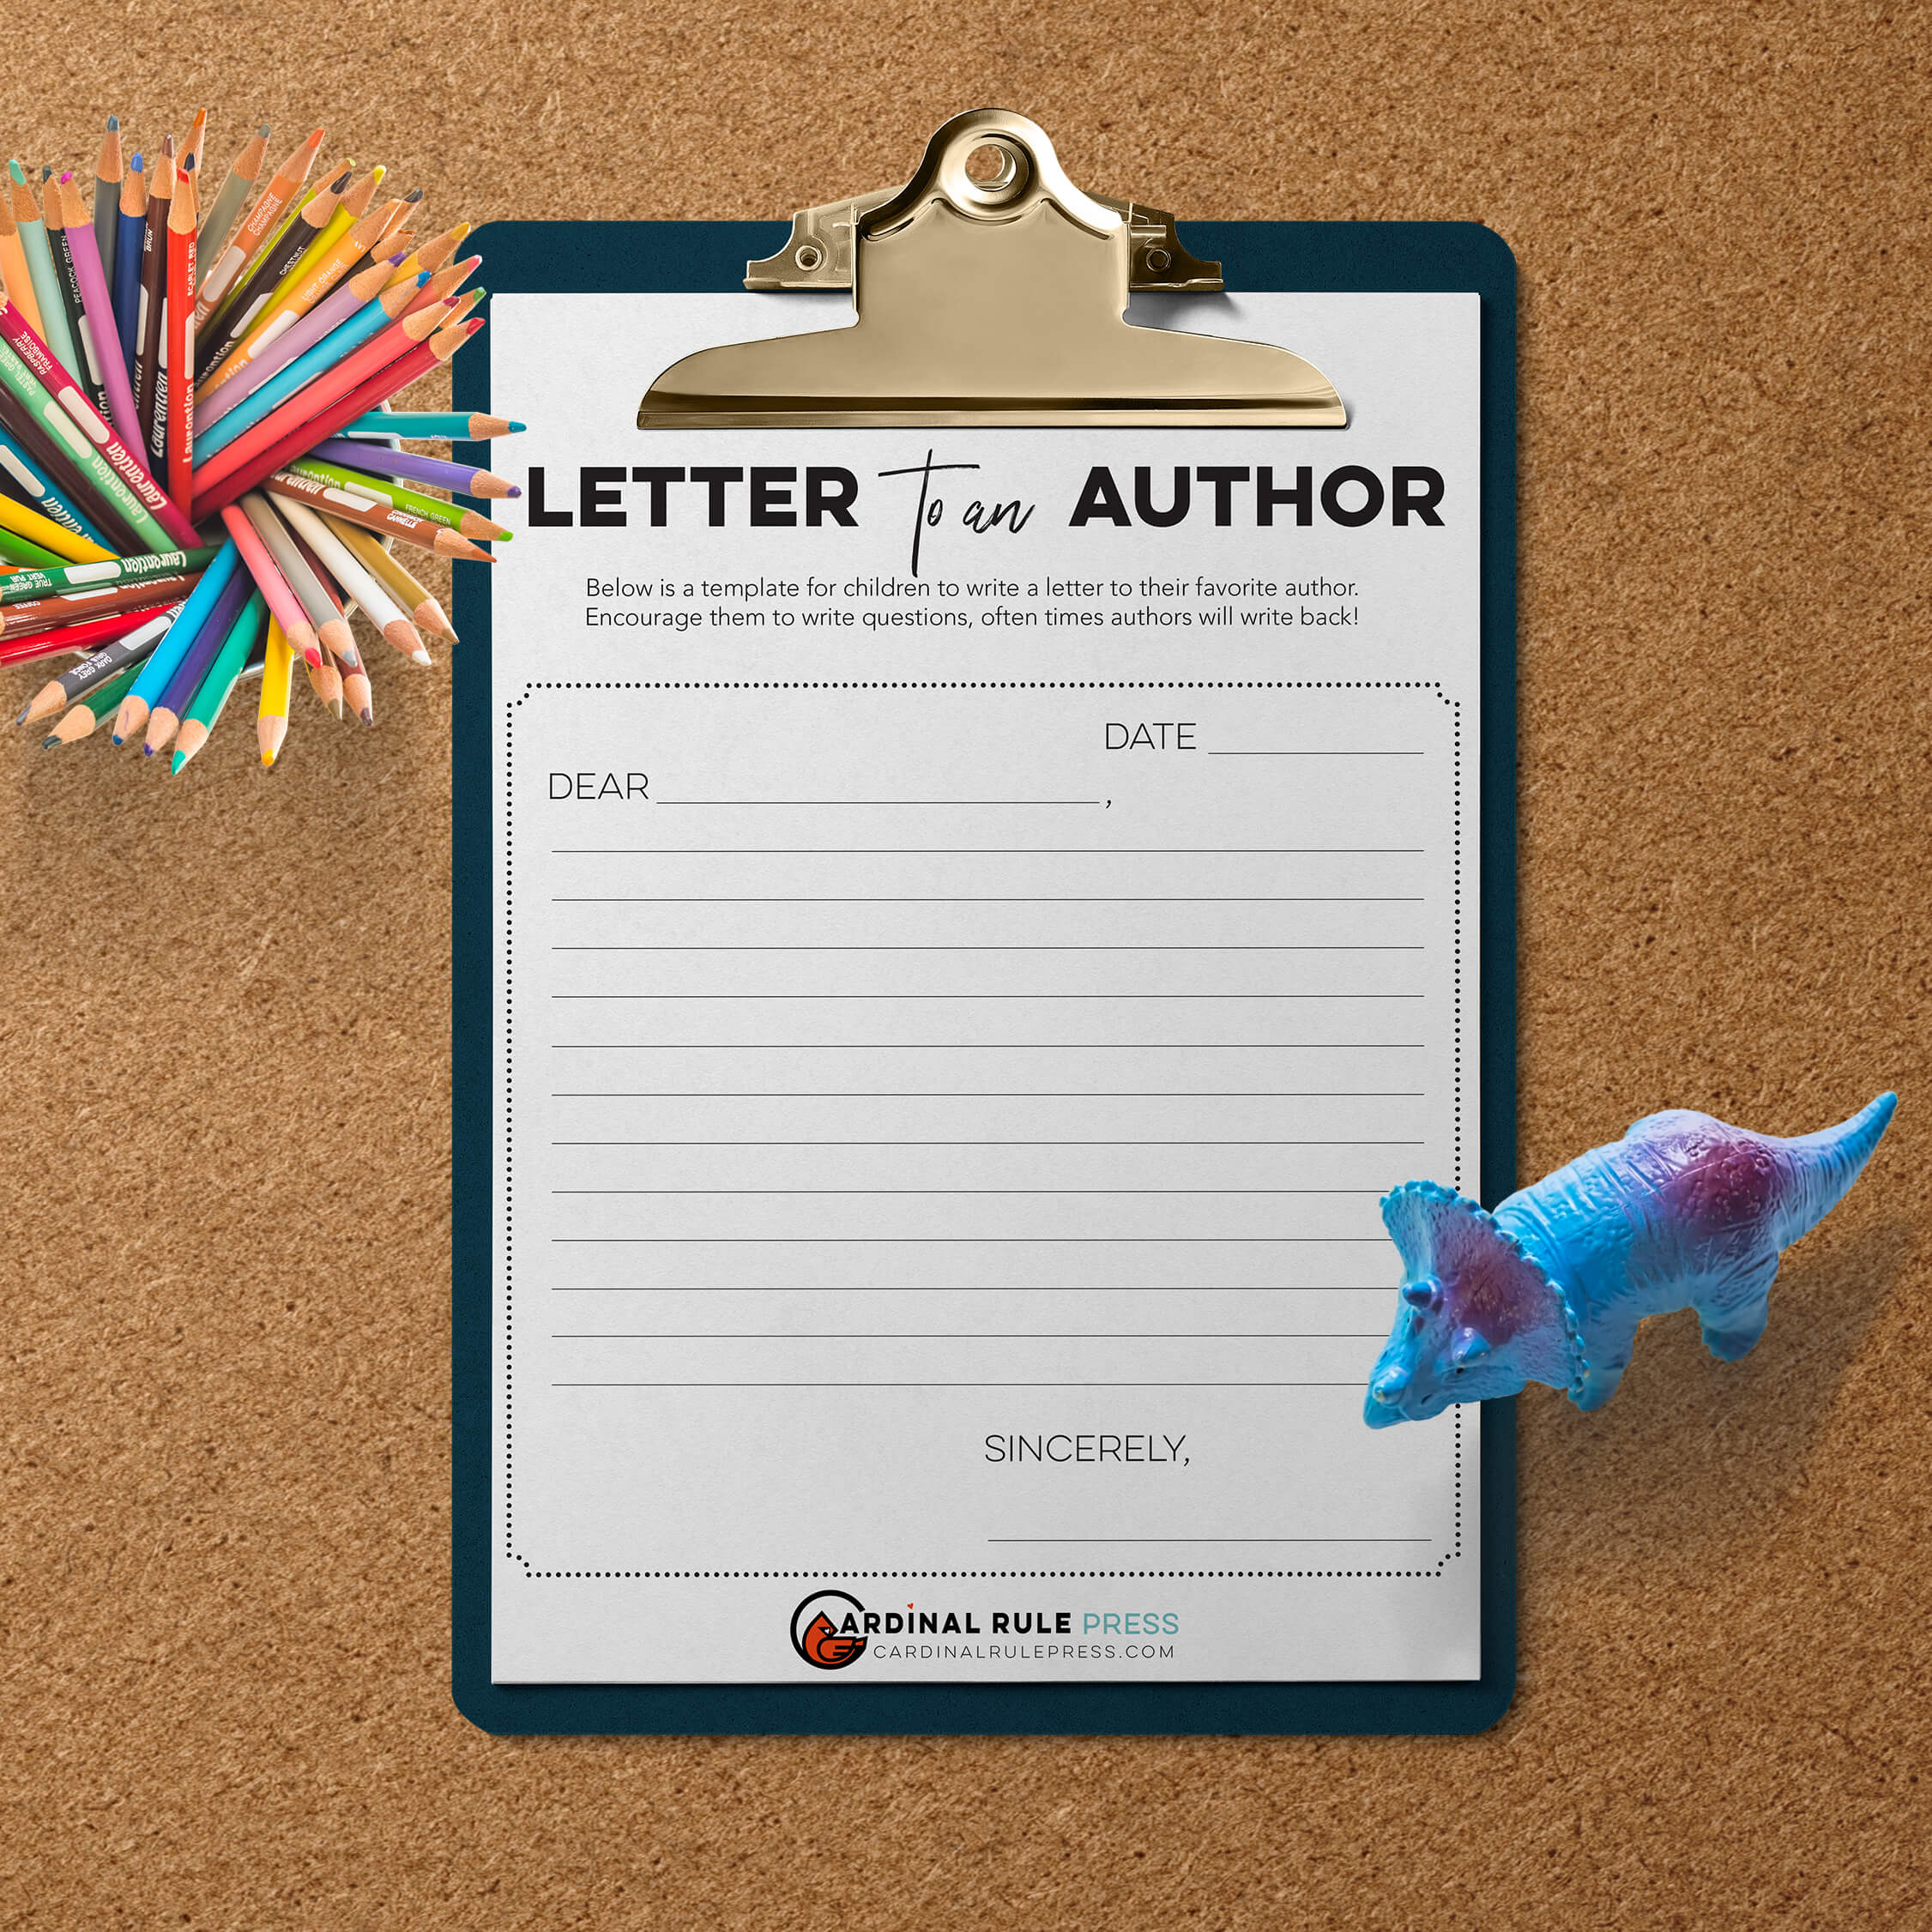 Do you know an author who has inspired you or left a positive mark on you? Write them a letter! Authors LOVE snail mail. Cardinal Rule Press has created a FREE Letter to an Author Printable – download yours now.